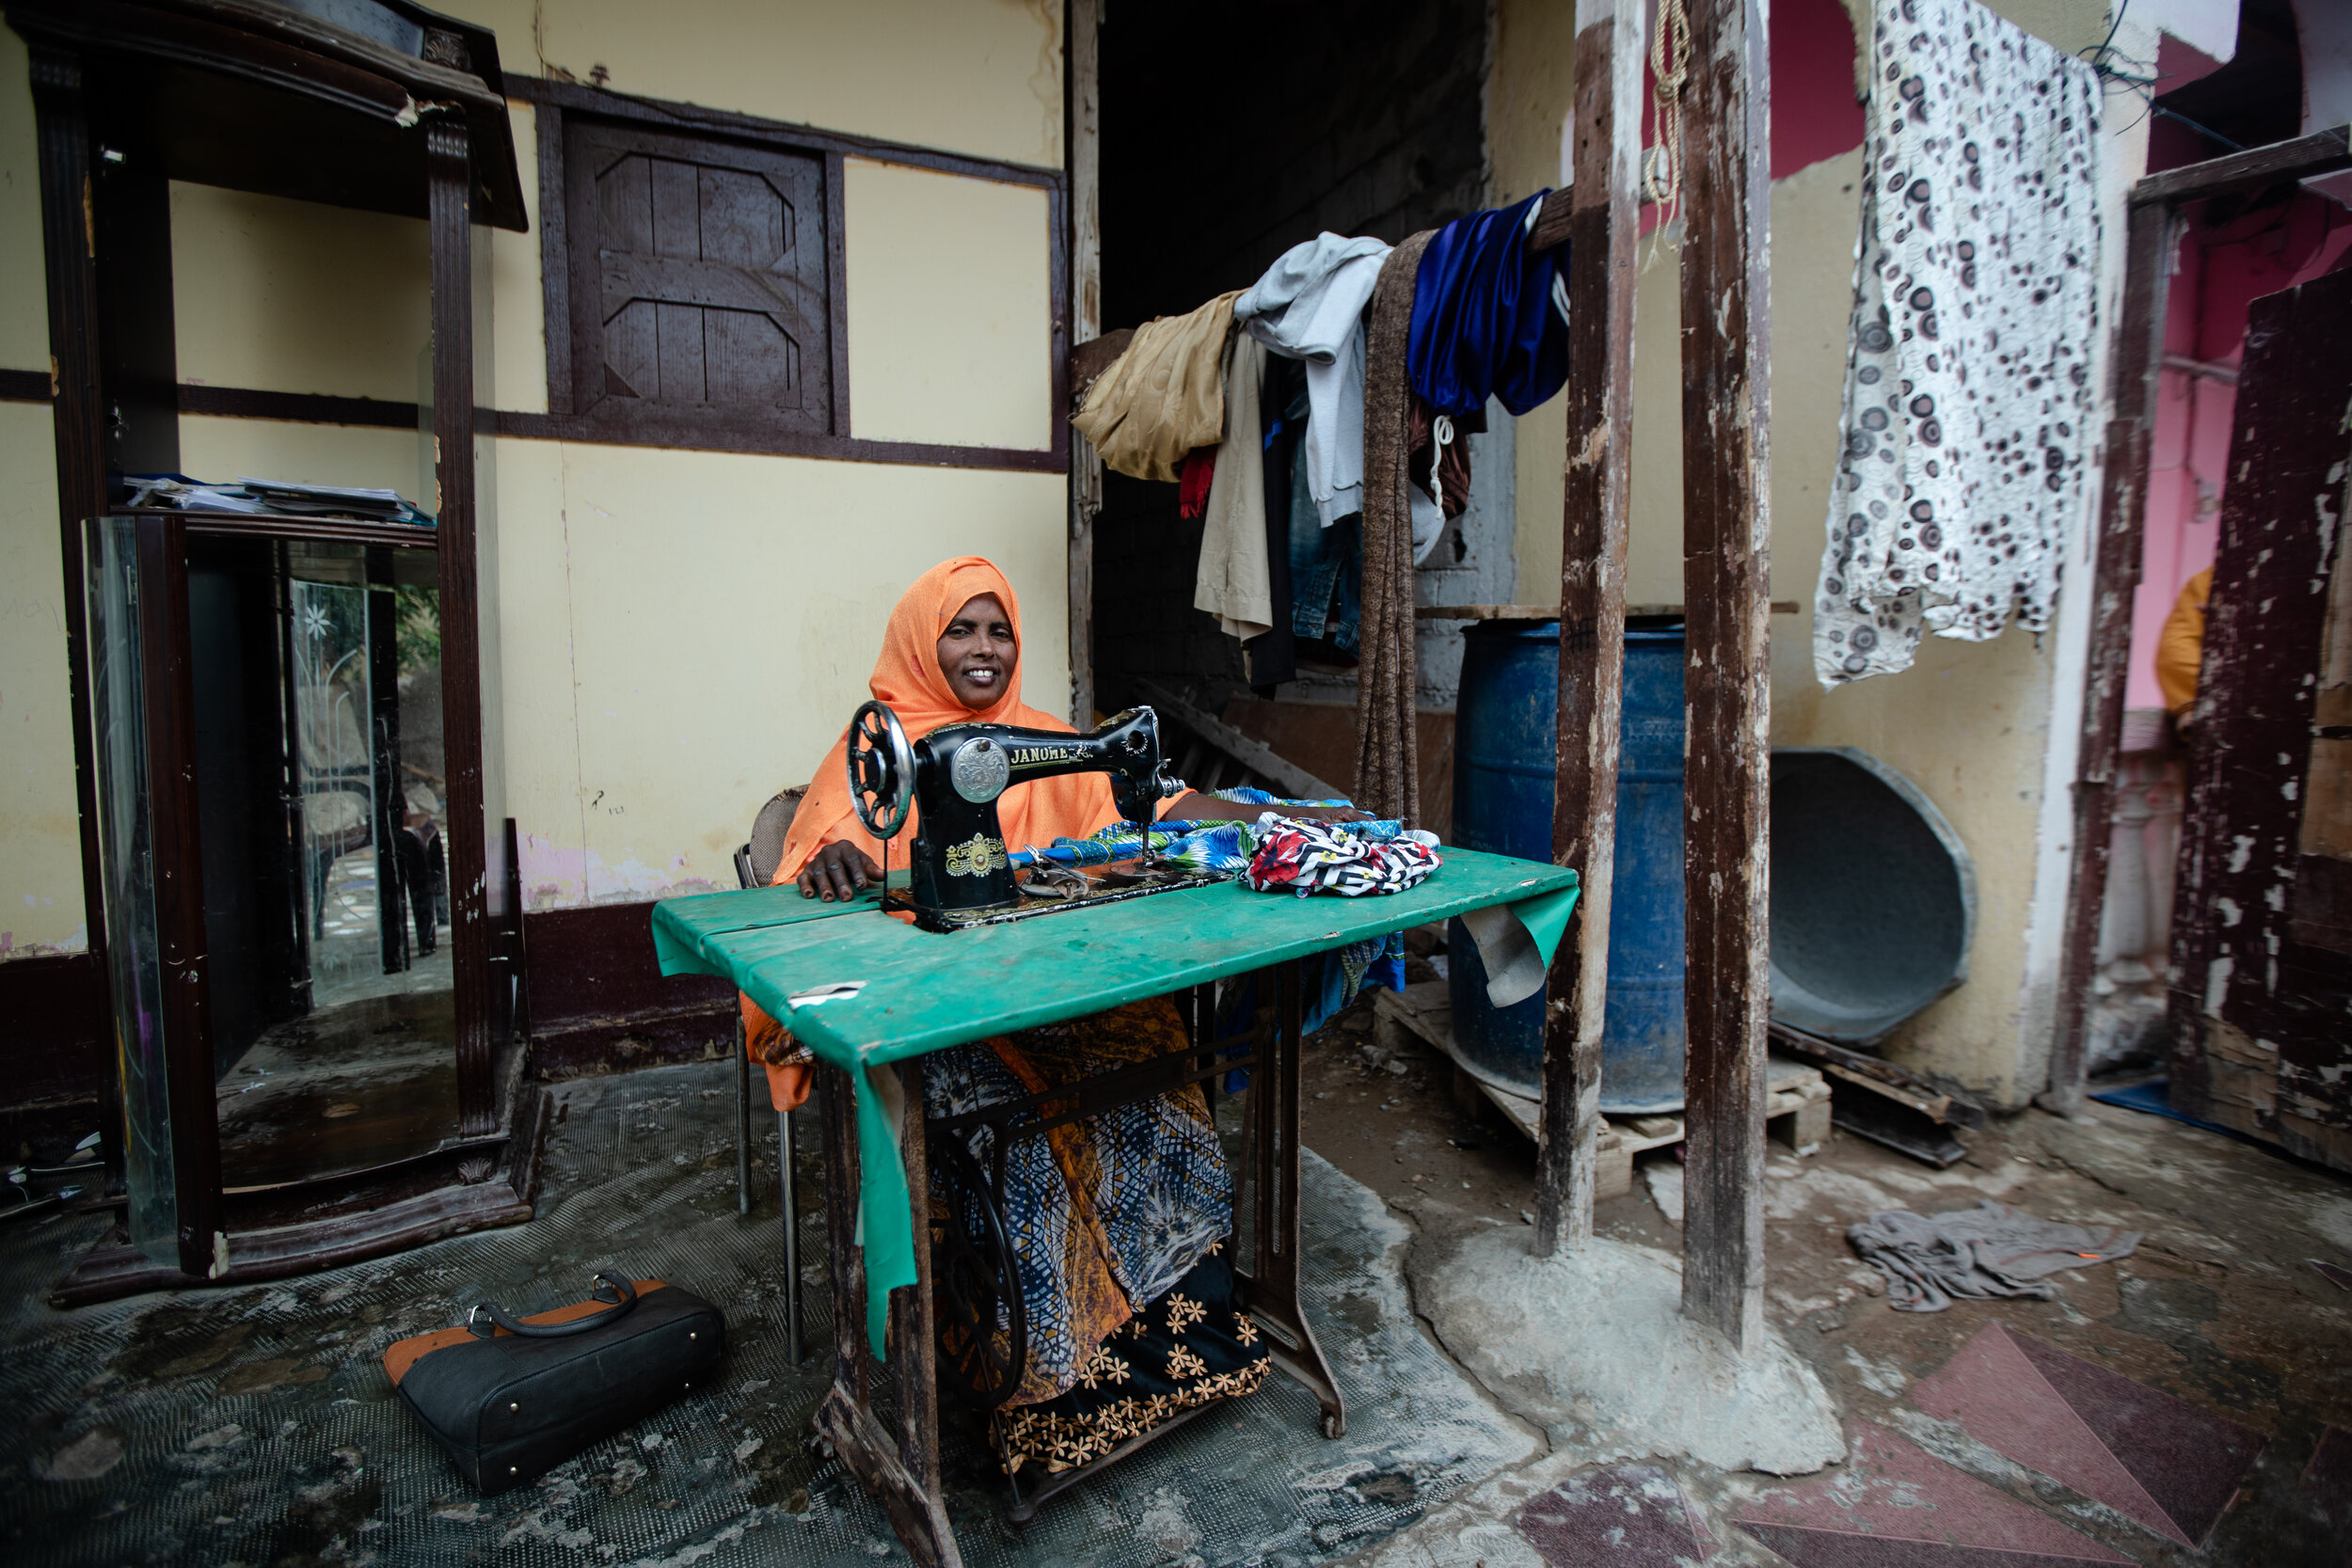  in Djibouti city I met single mother Saada Tawalaneh Assoweh who, with the help of organizations that support women, had participated in trainings to pursue her dream of becoming a successful tailor and is now working both from home and at the stree